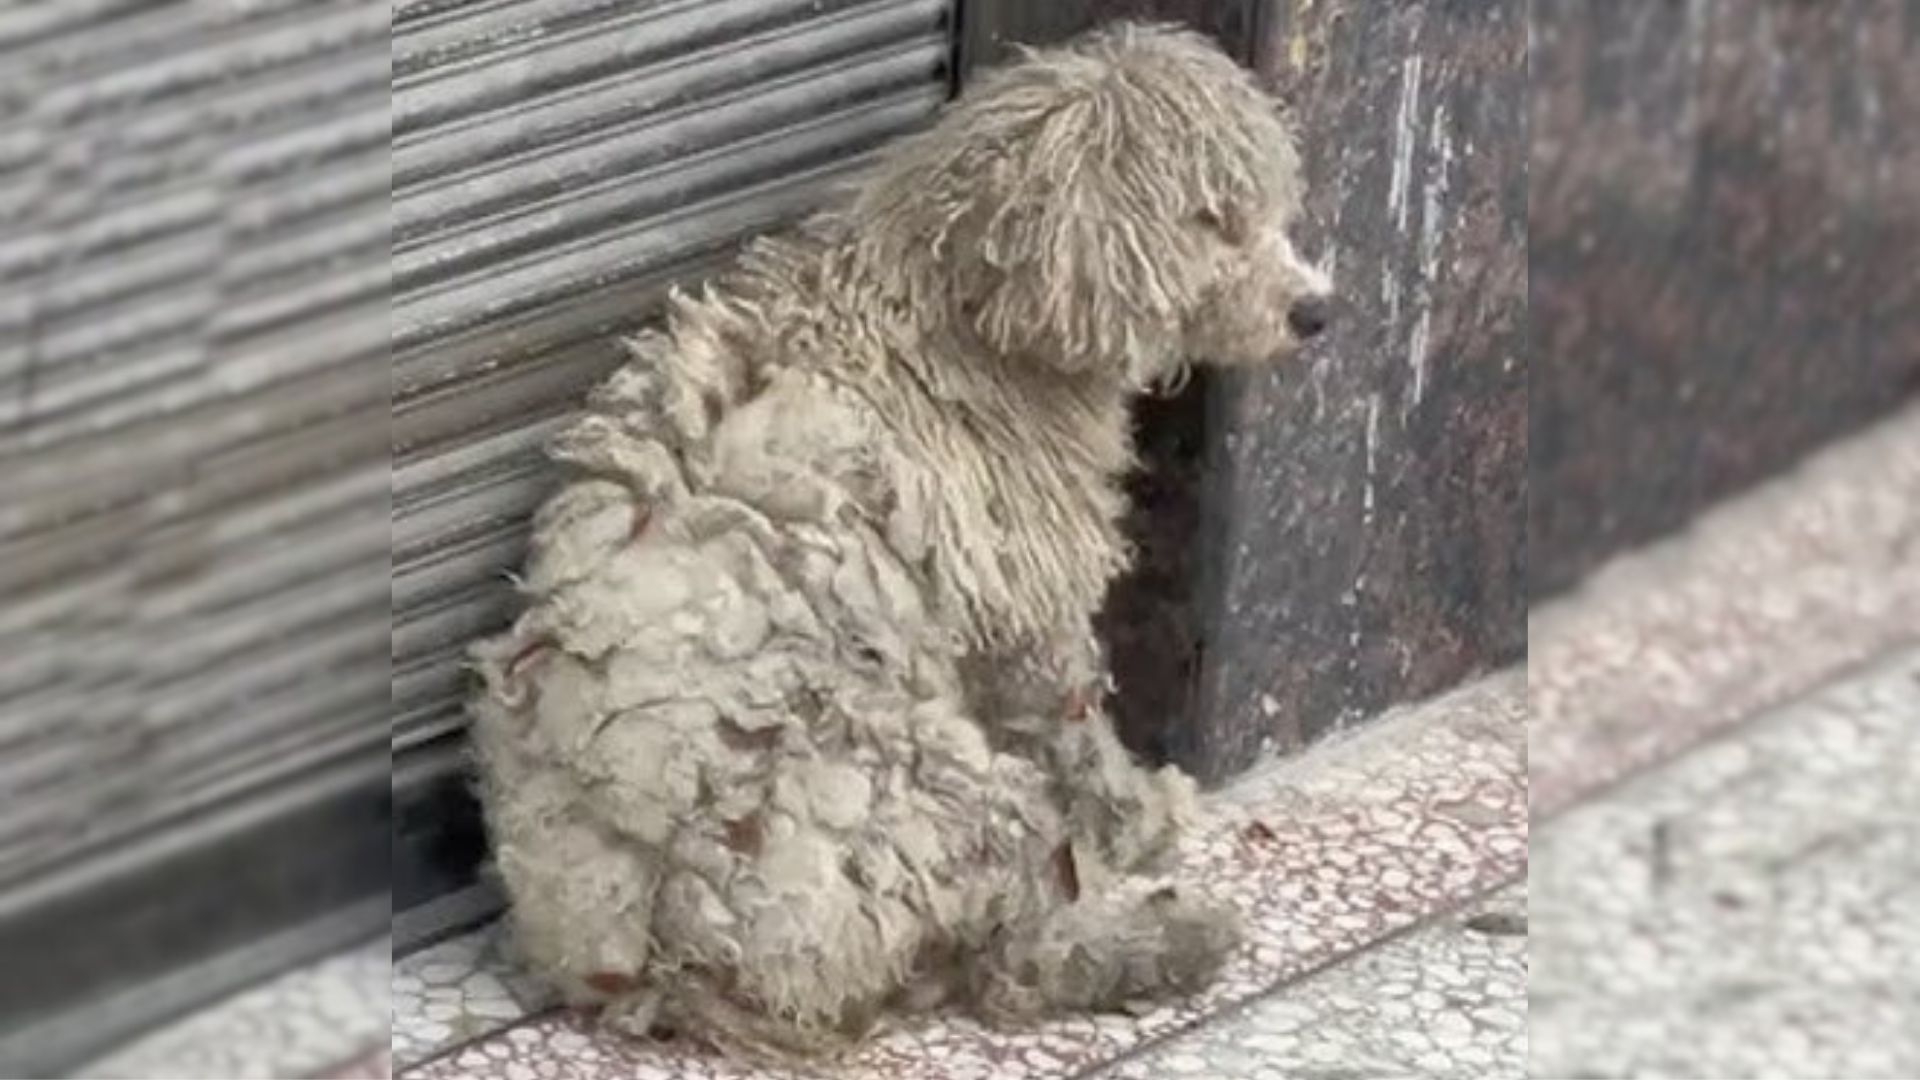 Shivering Puppy Was Desperate For Help But Then A Kind Person Noticed Her And Came To Help